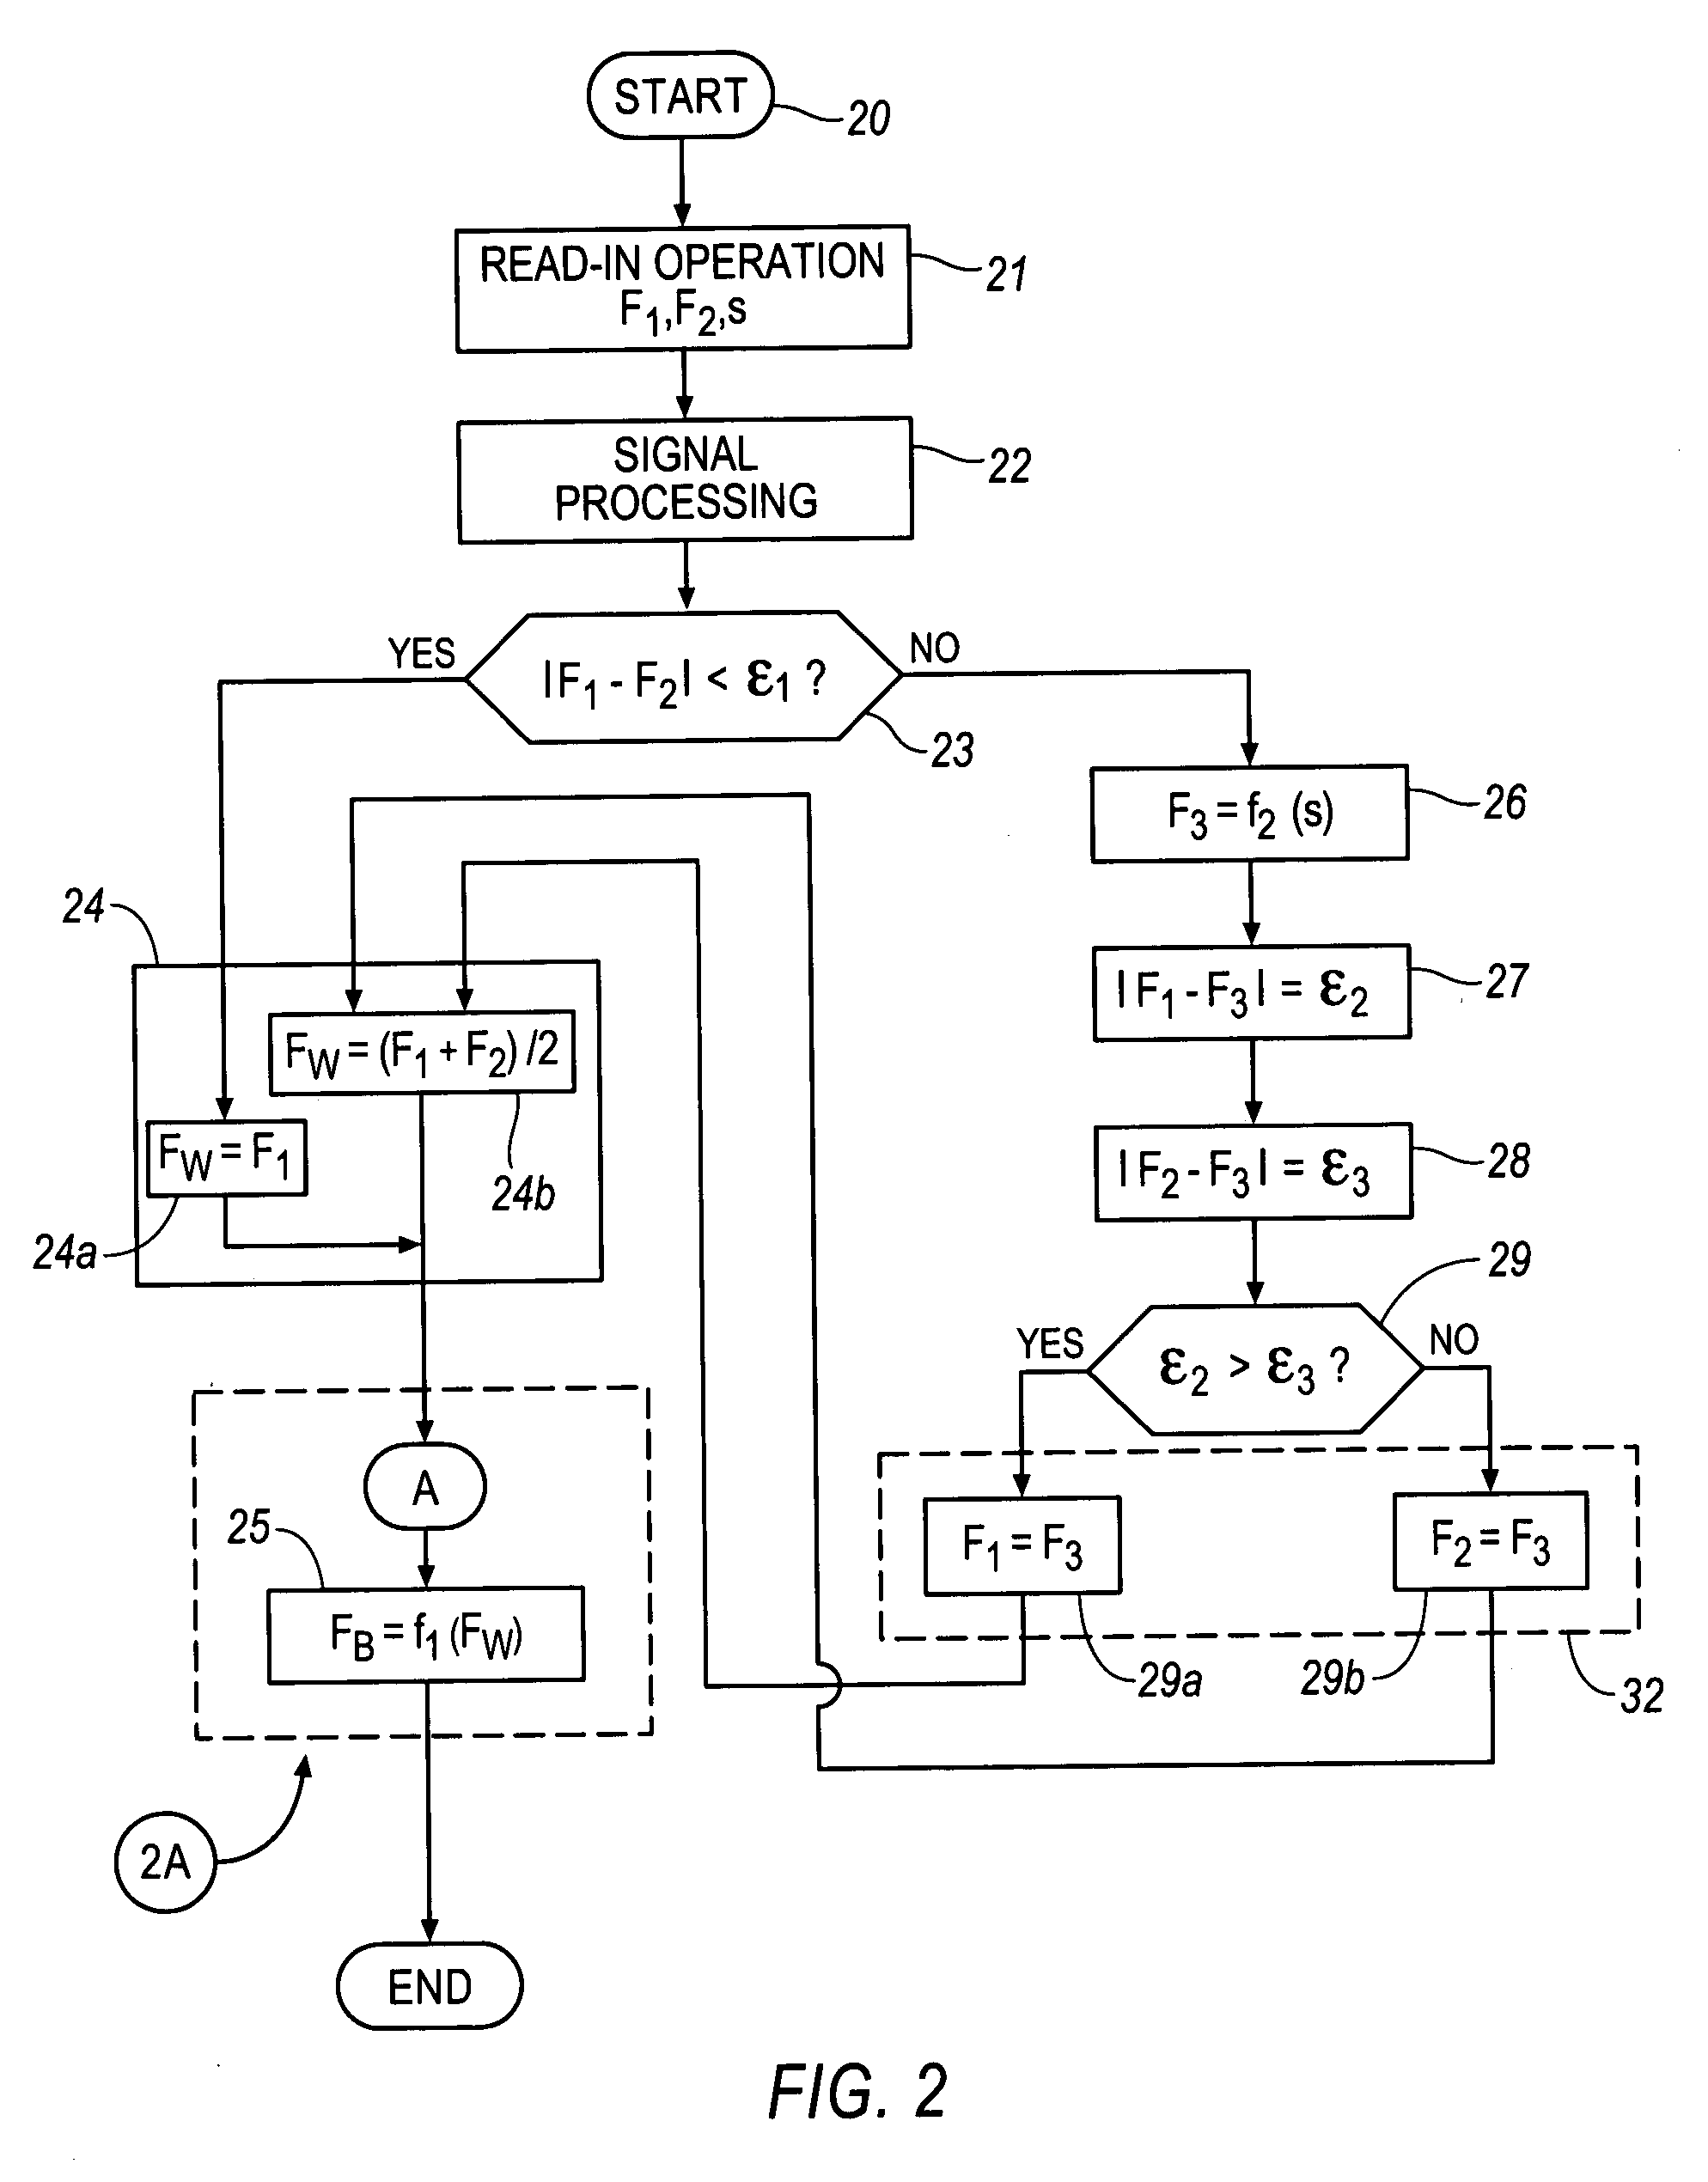 Method and device for controlling or regulating the brake system of a motor vehicle according to the "brake by wire" principle